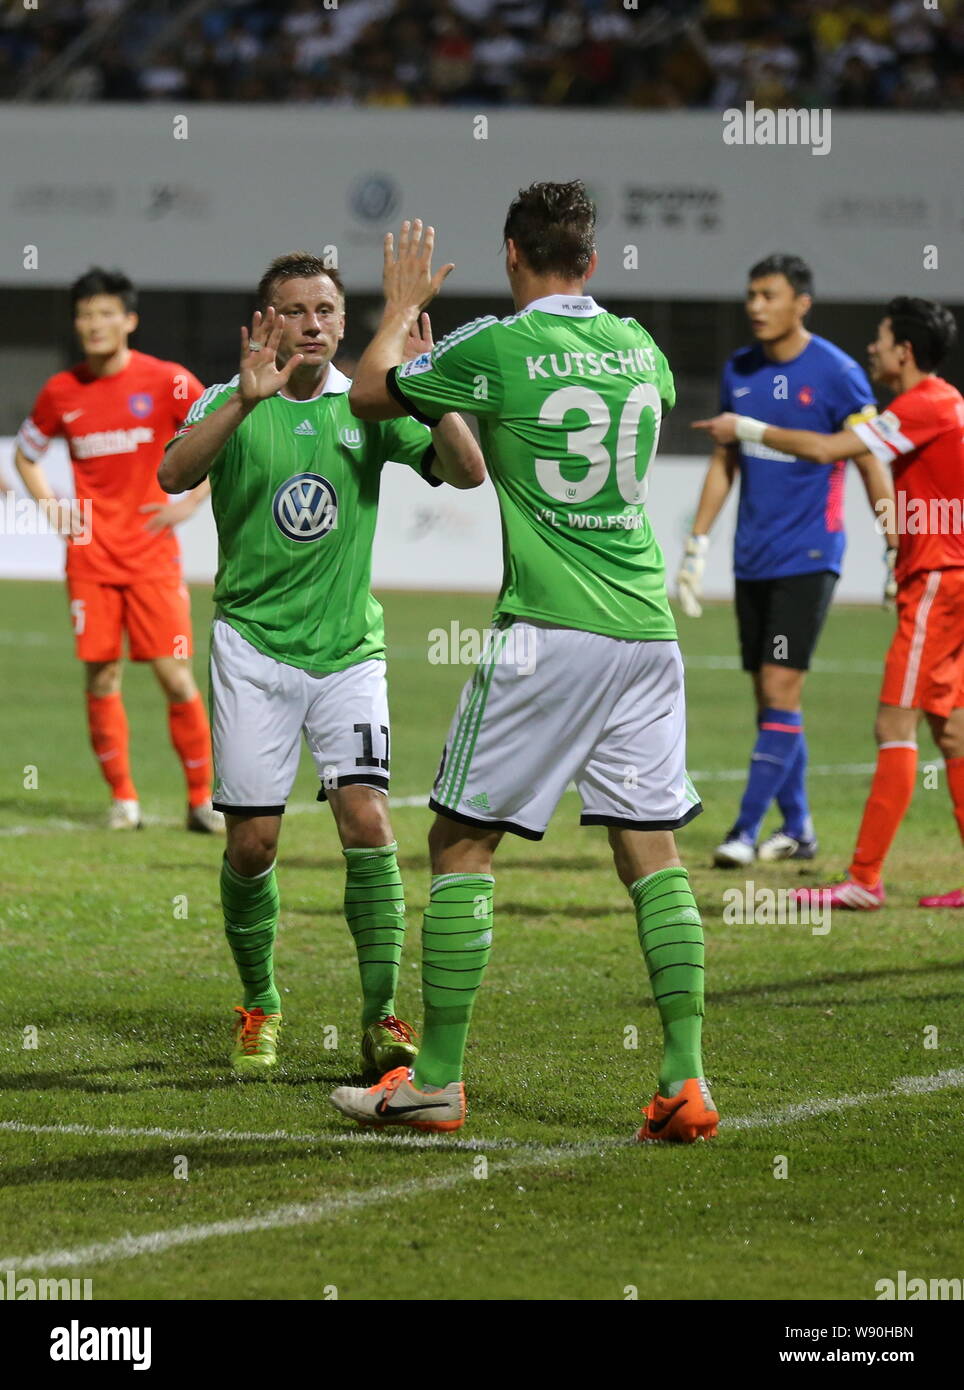 Ivica Olic, front left, and Stefan Kutschke of Germanys VfL Wolfsburg celebrate after scoring a goal against Chinas Qingdao Jonoon in a soccer friendl Stock Photo